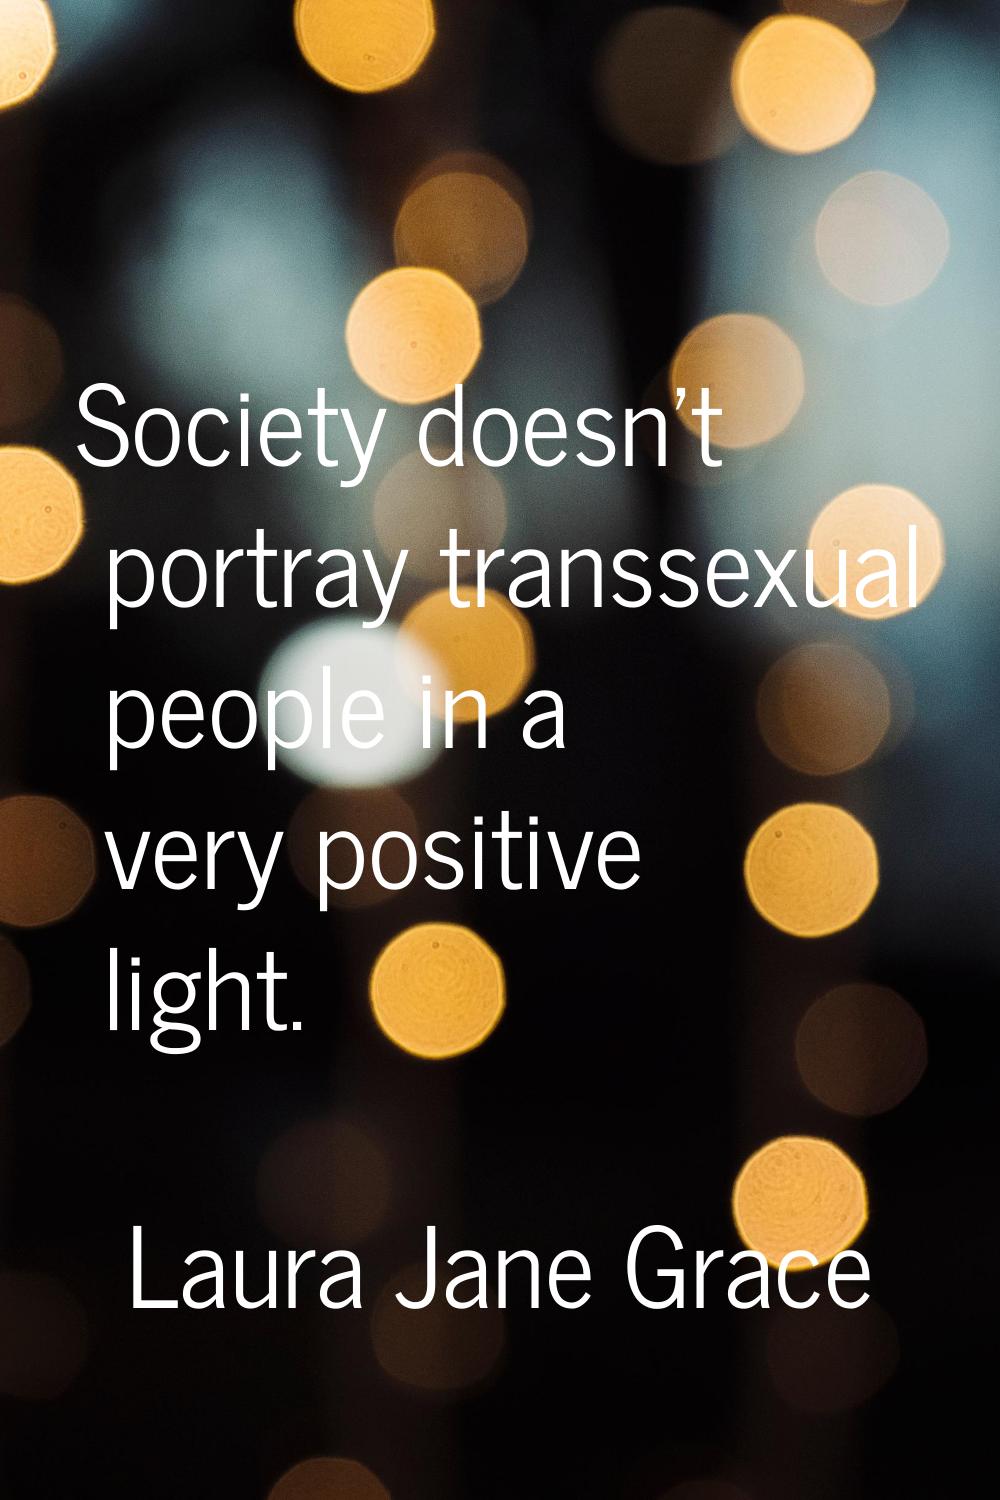 Society doesn't portray transsexual people in a very positive light.